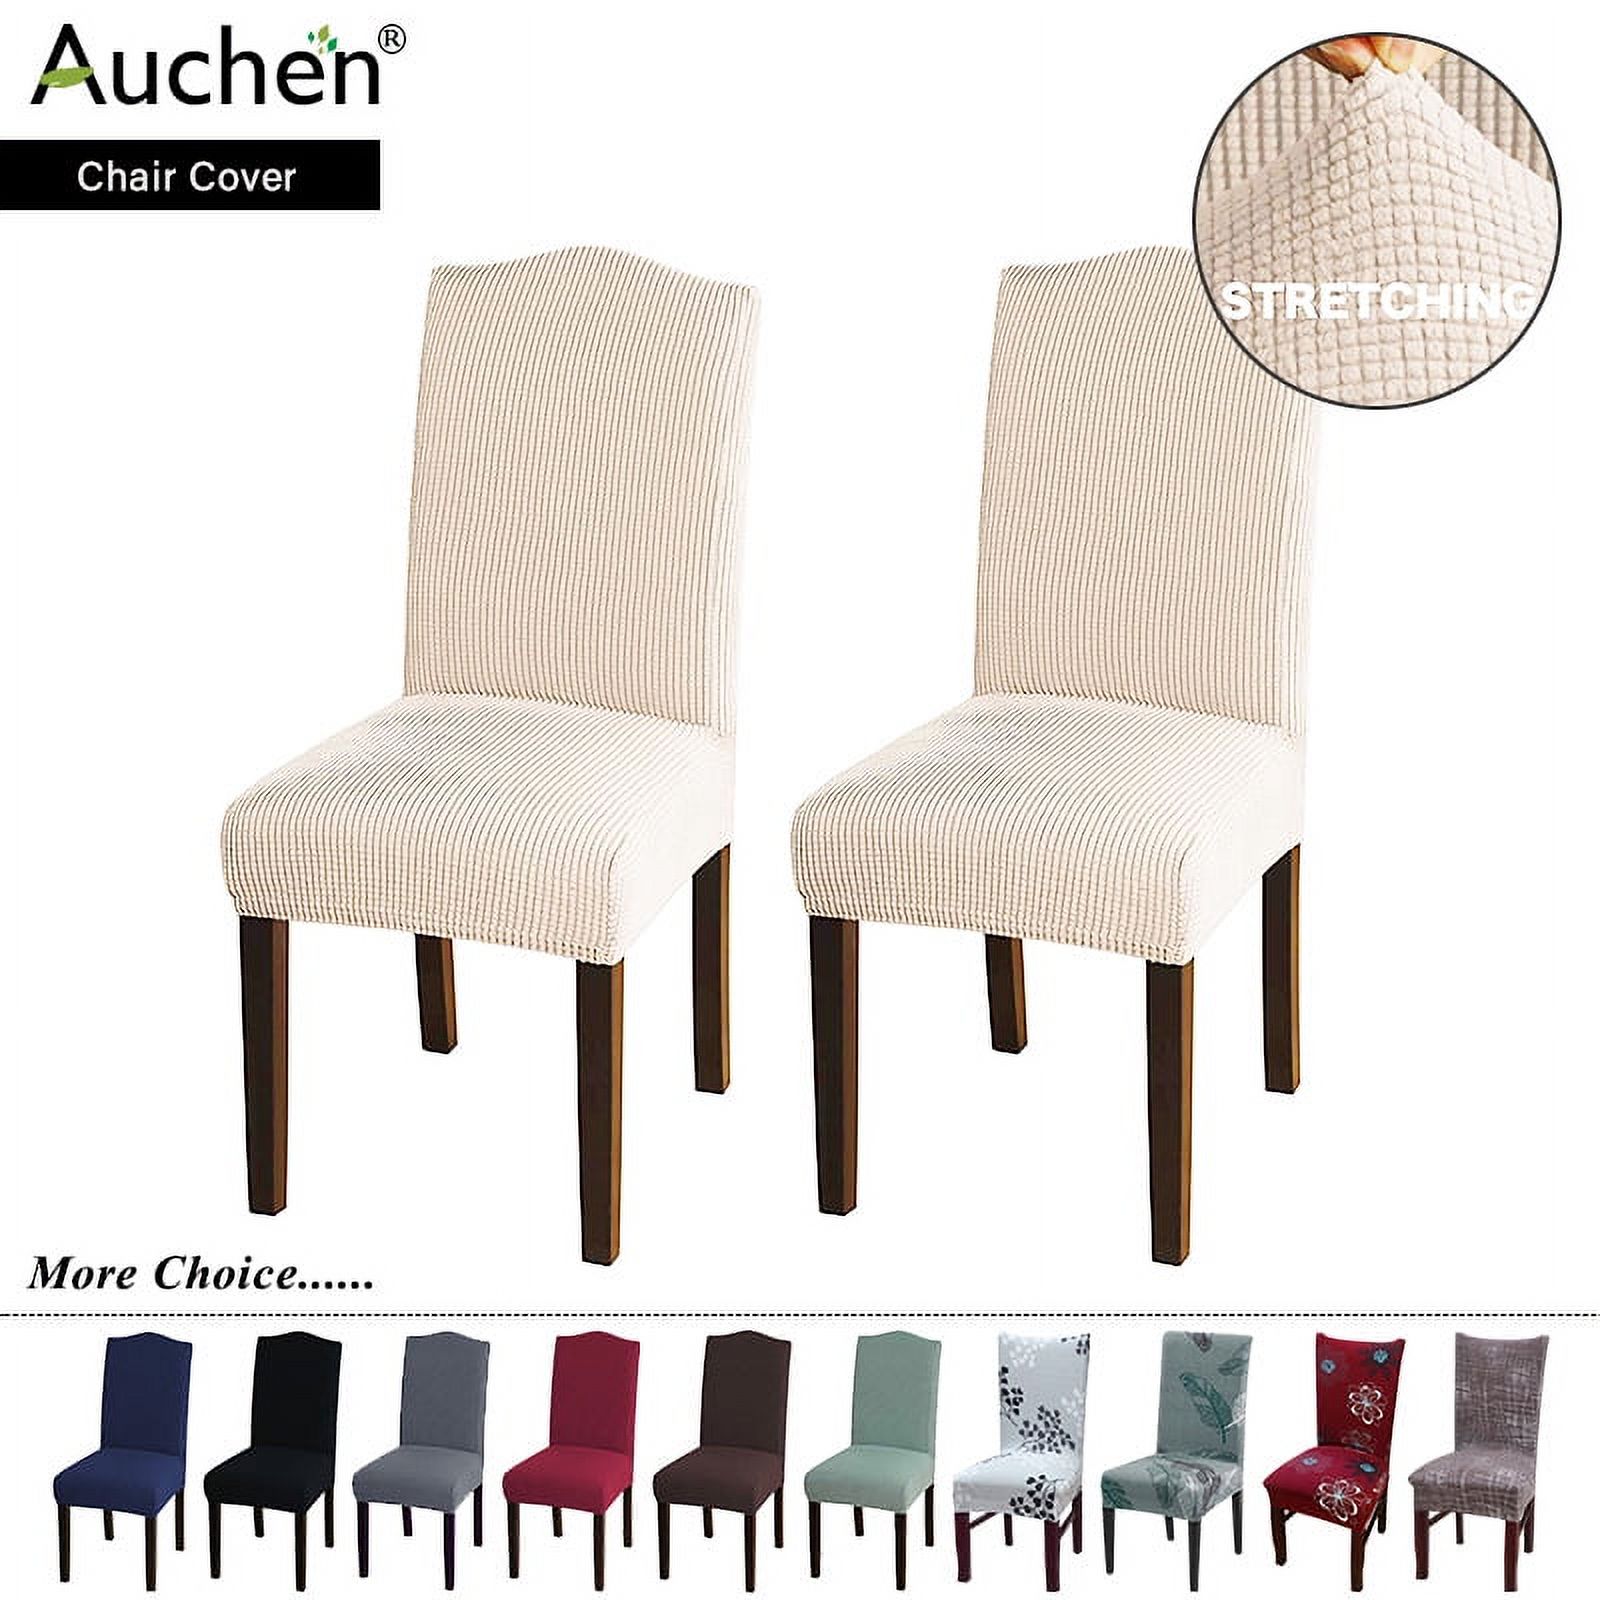 Chair Slipcover, AUCHEN Super Stretchy Dining Chair Covers Set of 2, Parsons Chair Protector Covers Chair Covers for Dining Room, Furniture Protector Covers for Restaurant Hotel Ceremony (Beige) - image 1 of 9